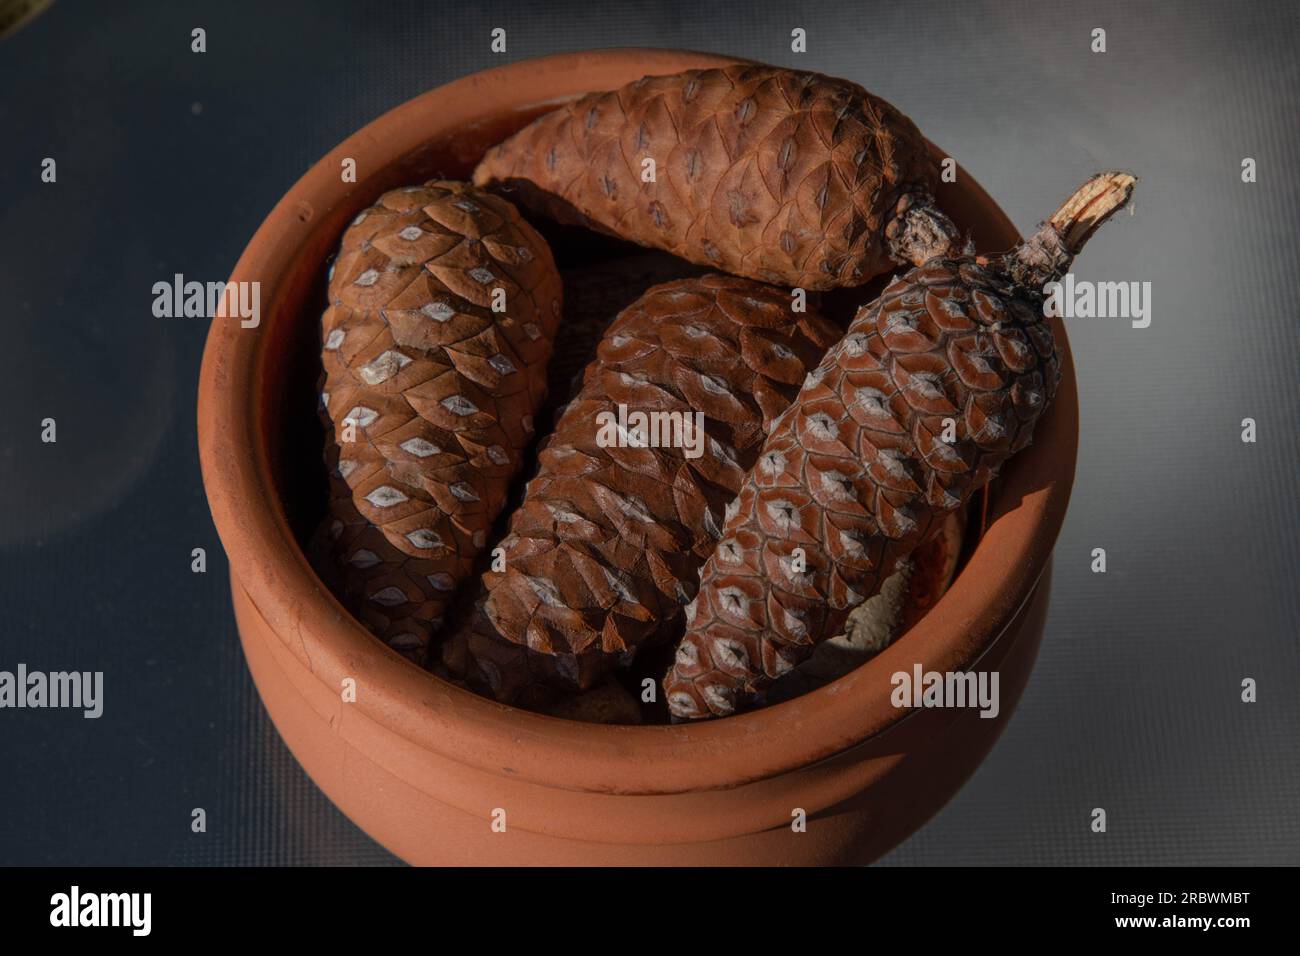 Pile of small wooden pine cones in clay pottery isolated on empty table. Closeup natural unripe pine cones of conifer tree Stock Photo